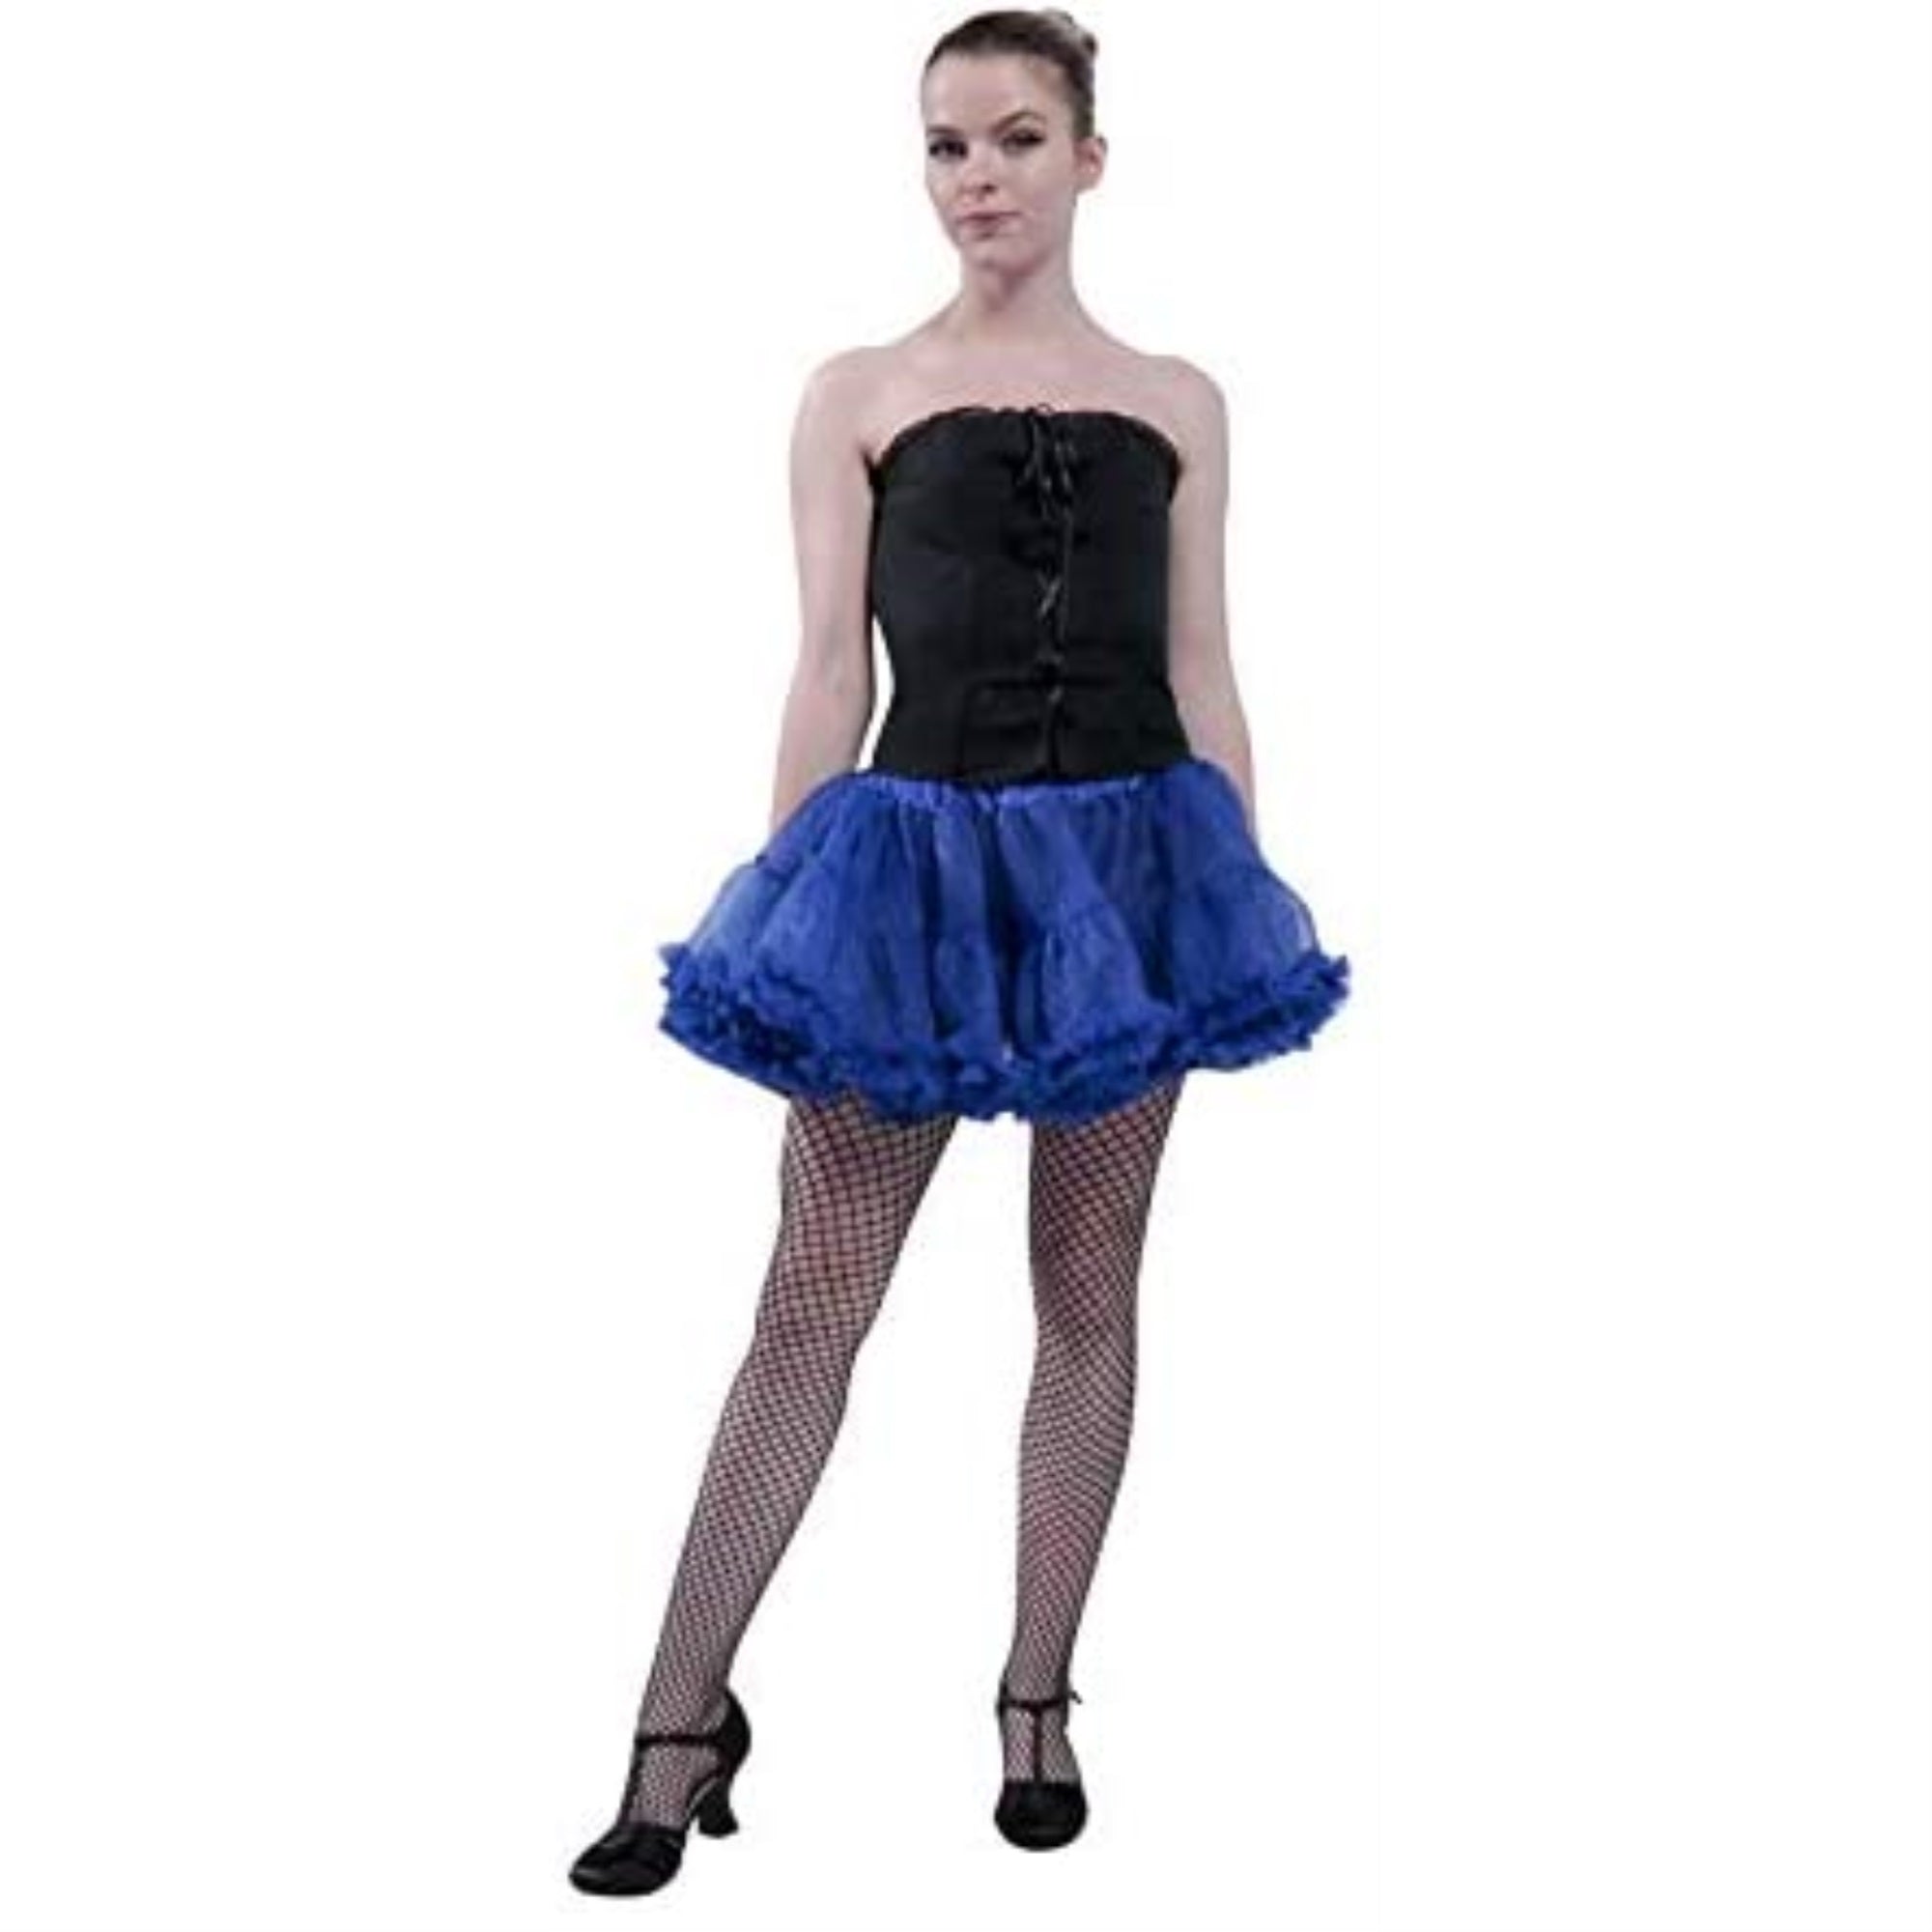 Women's 15in Sexy Tutu Skirt for Halloween & Costume Wear-Royal Blue